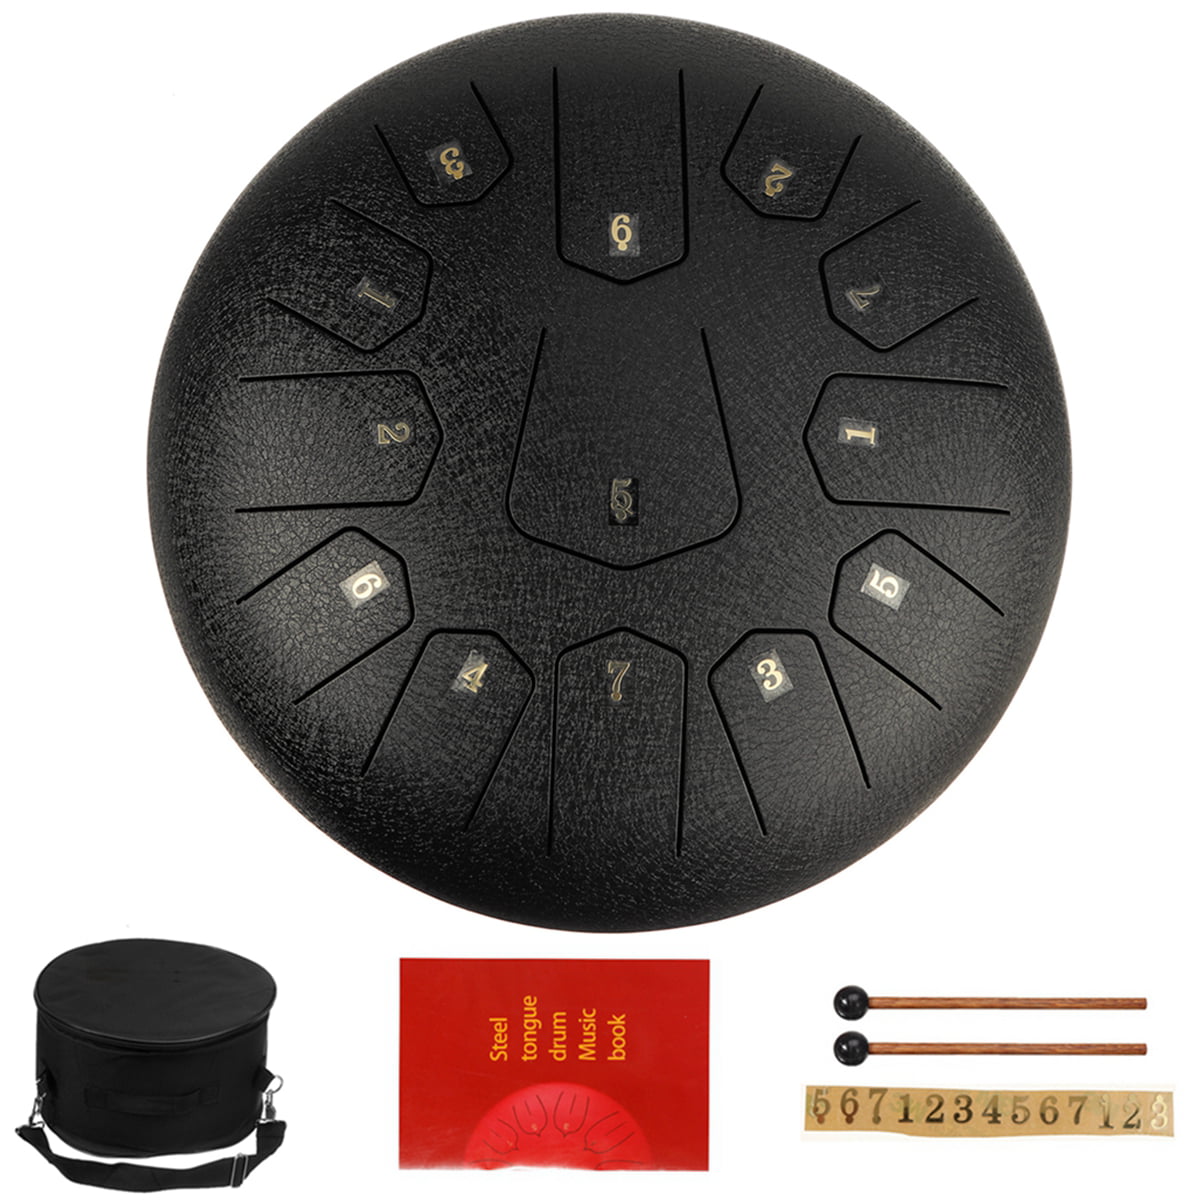 Niome 12 Inch Steel Tongue Drum 13 Notes Black w/Travel Bag and Mallets,Tank Drum Chakra Drum,Percussion Hang Drum Instrument 13-Notes, Dark Blue